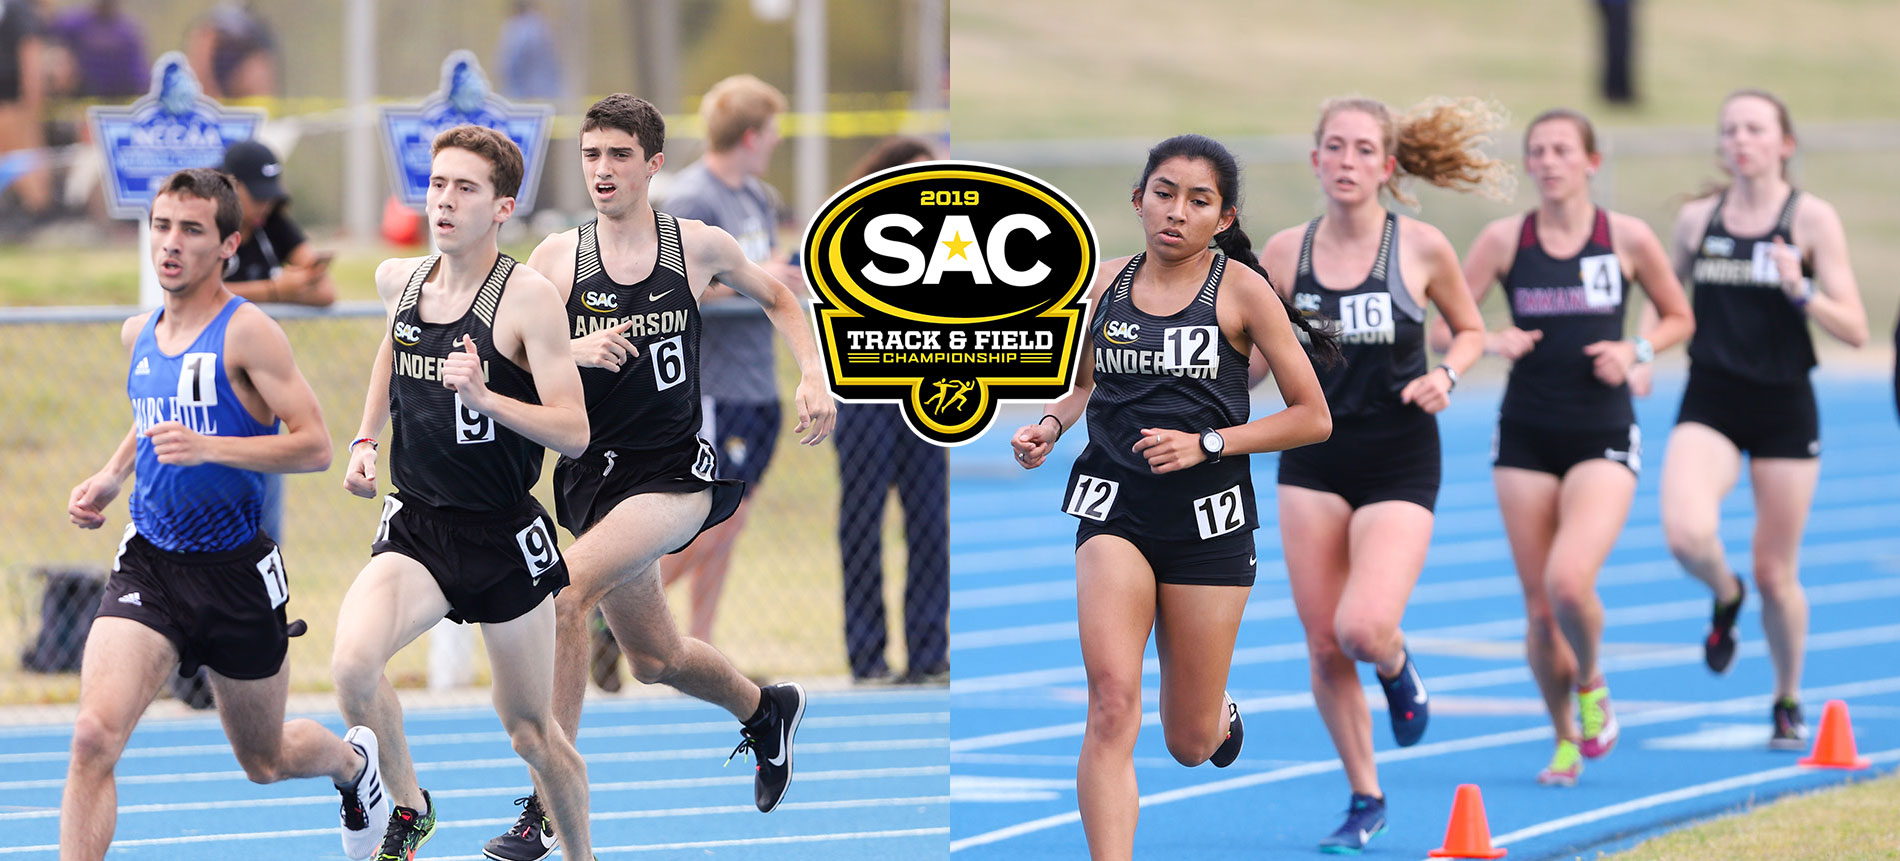 Women’s Track and Field Finishes Sixth at SAC Track and Field Championships; Trojan Men Finish Ninth